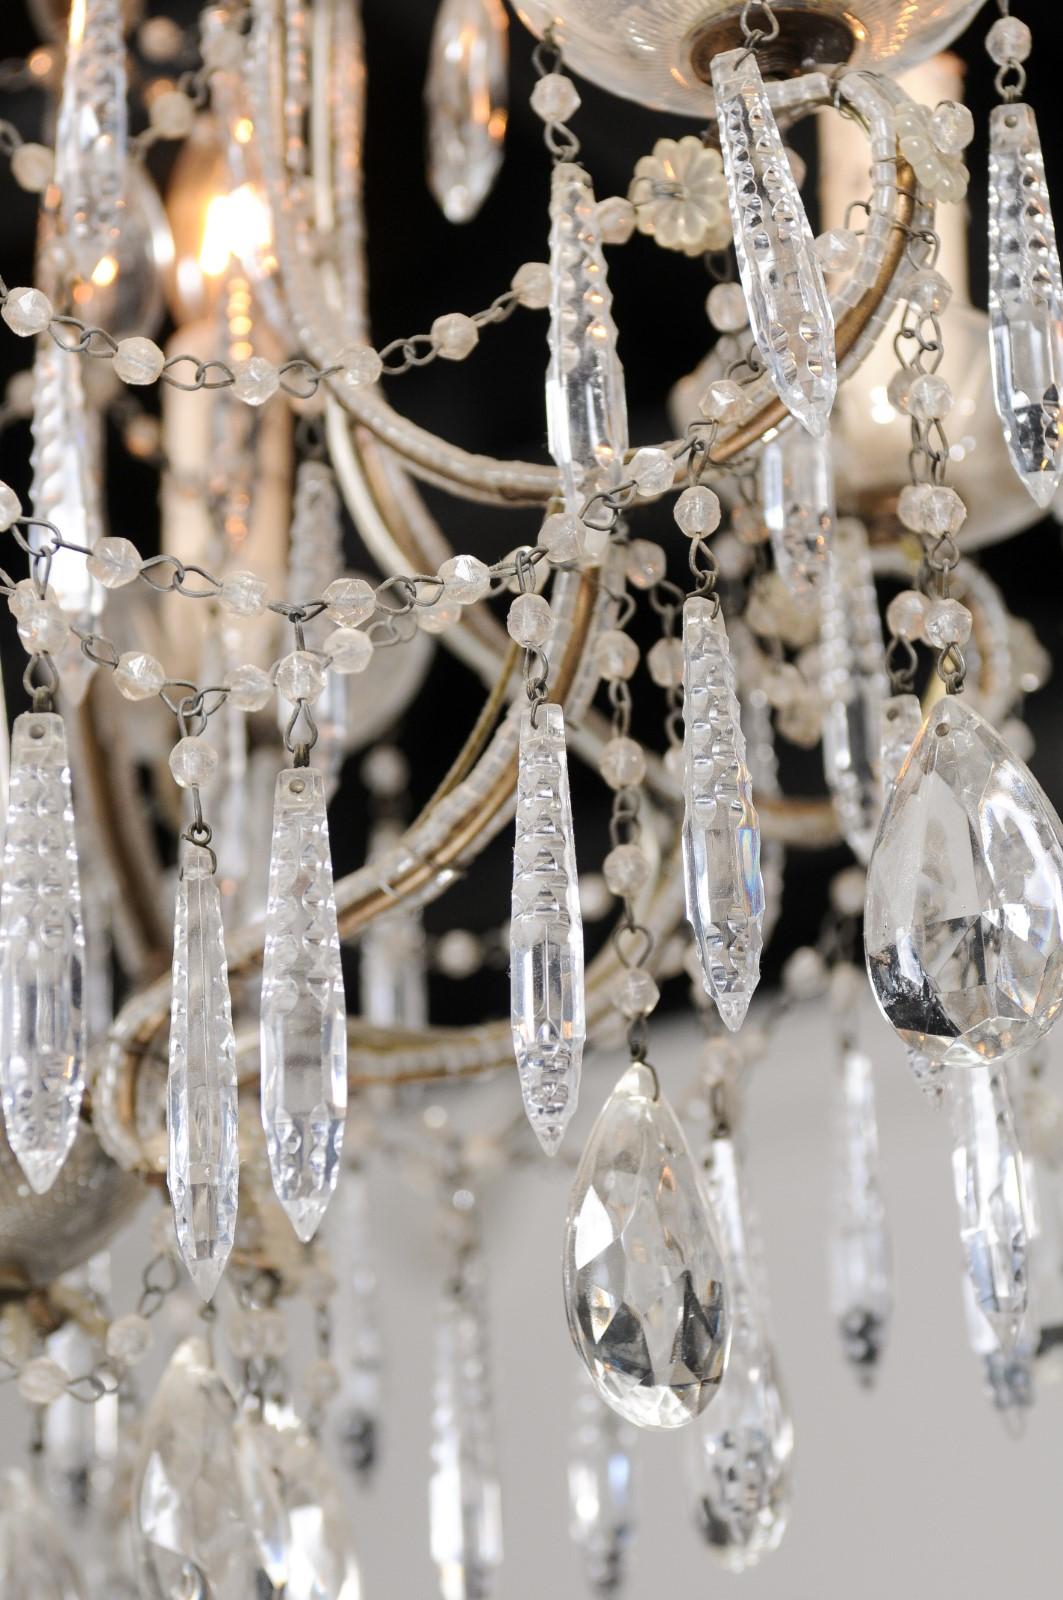 Italian 19th Century Six-Light Chandelier with Beaded Arms and Spear Crystals For Sale 11